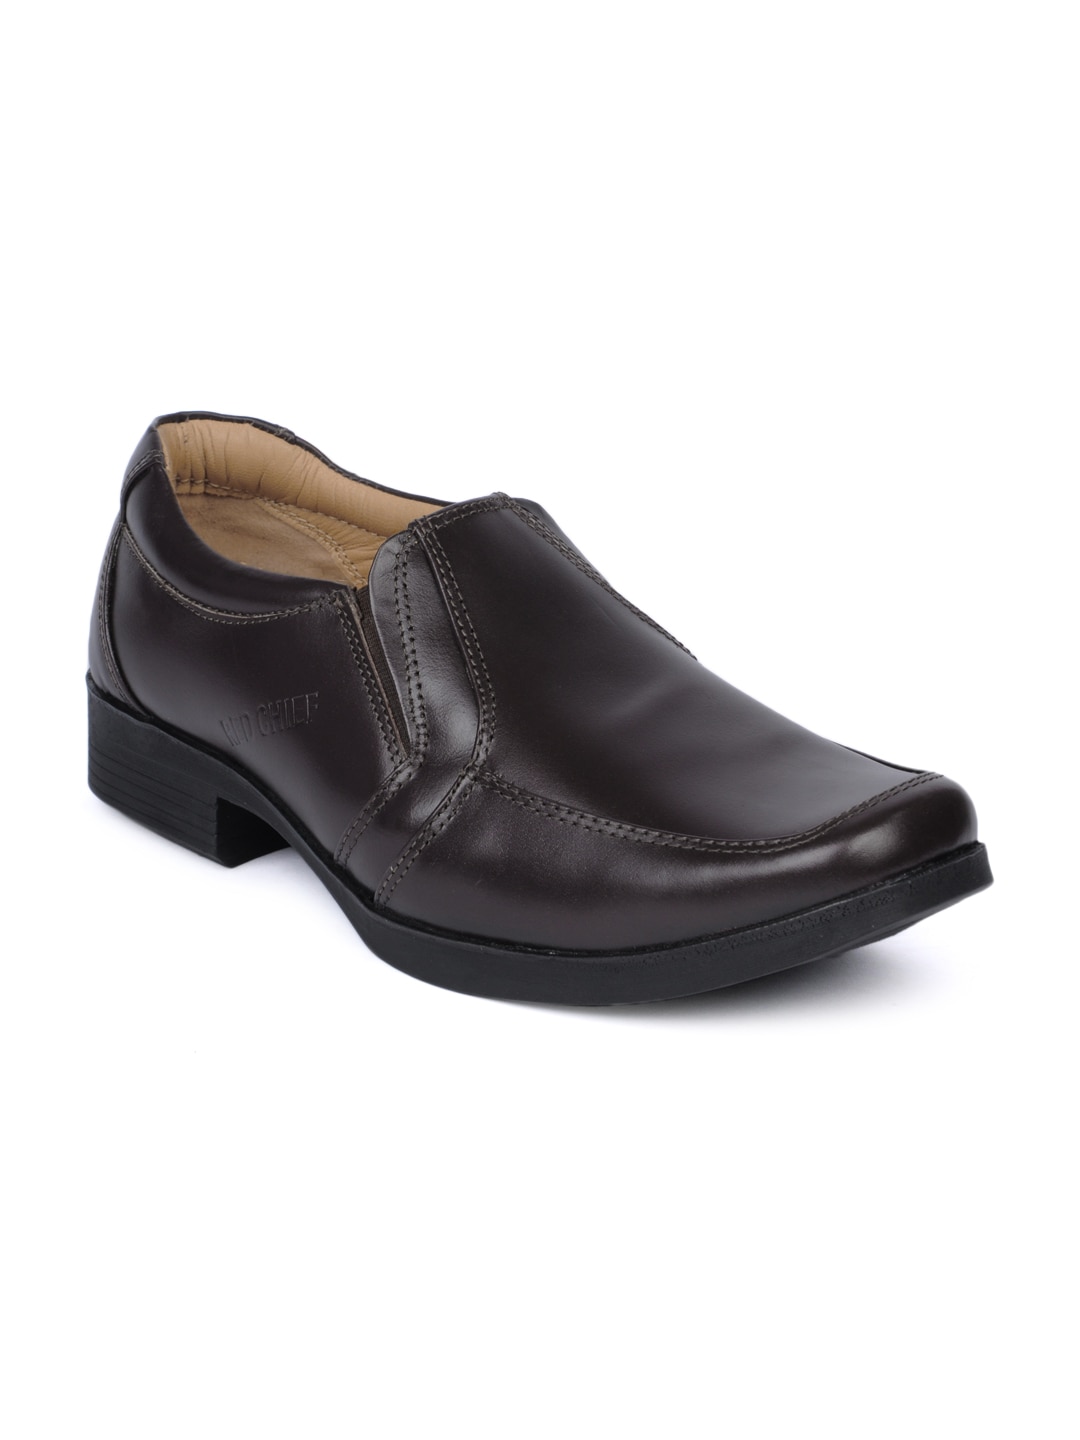 Red Chief Men Brown Formal Shoes